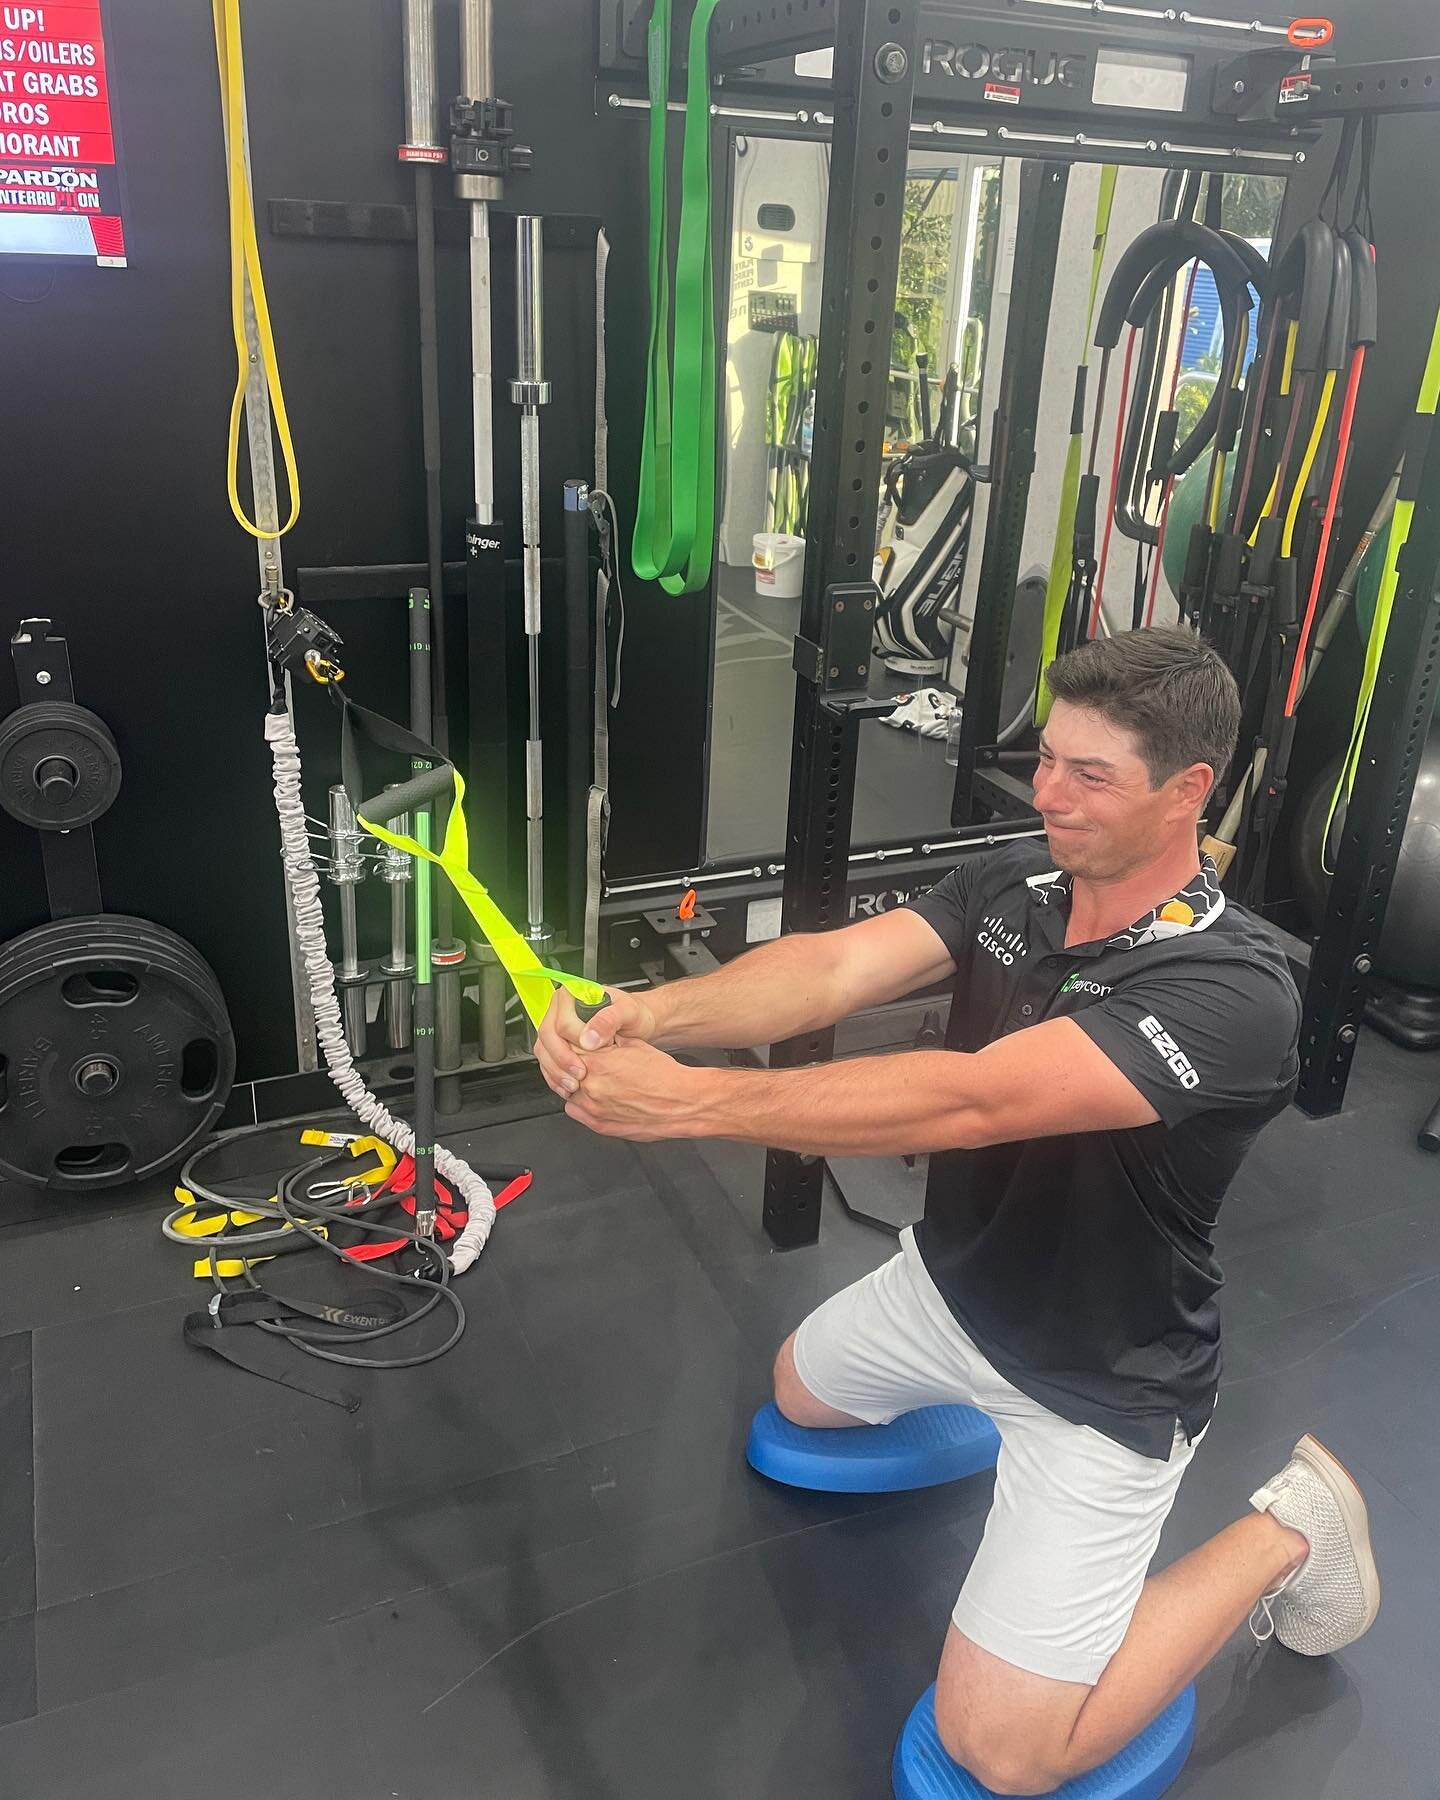 Pleased to welcome @viktor_hovland onboard for season 2023. Nice start at @rbcheritage 💪🏻

#golf #performance #fitness #physio #strength #golfperformance #sportscience #trainhard #trainsmart